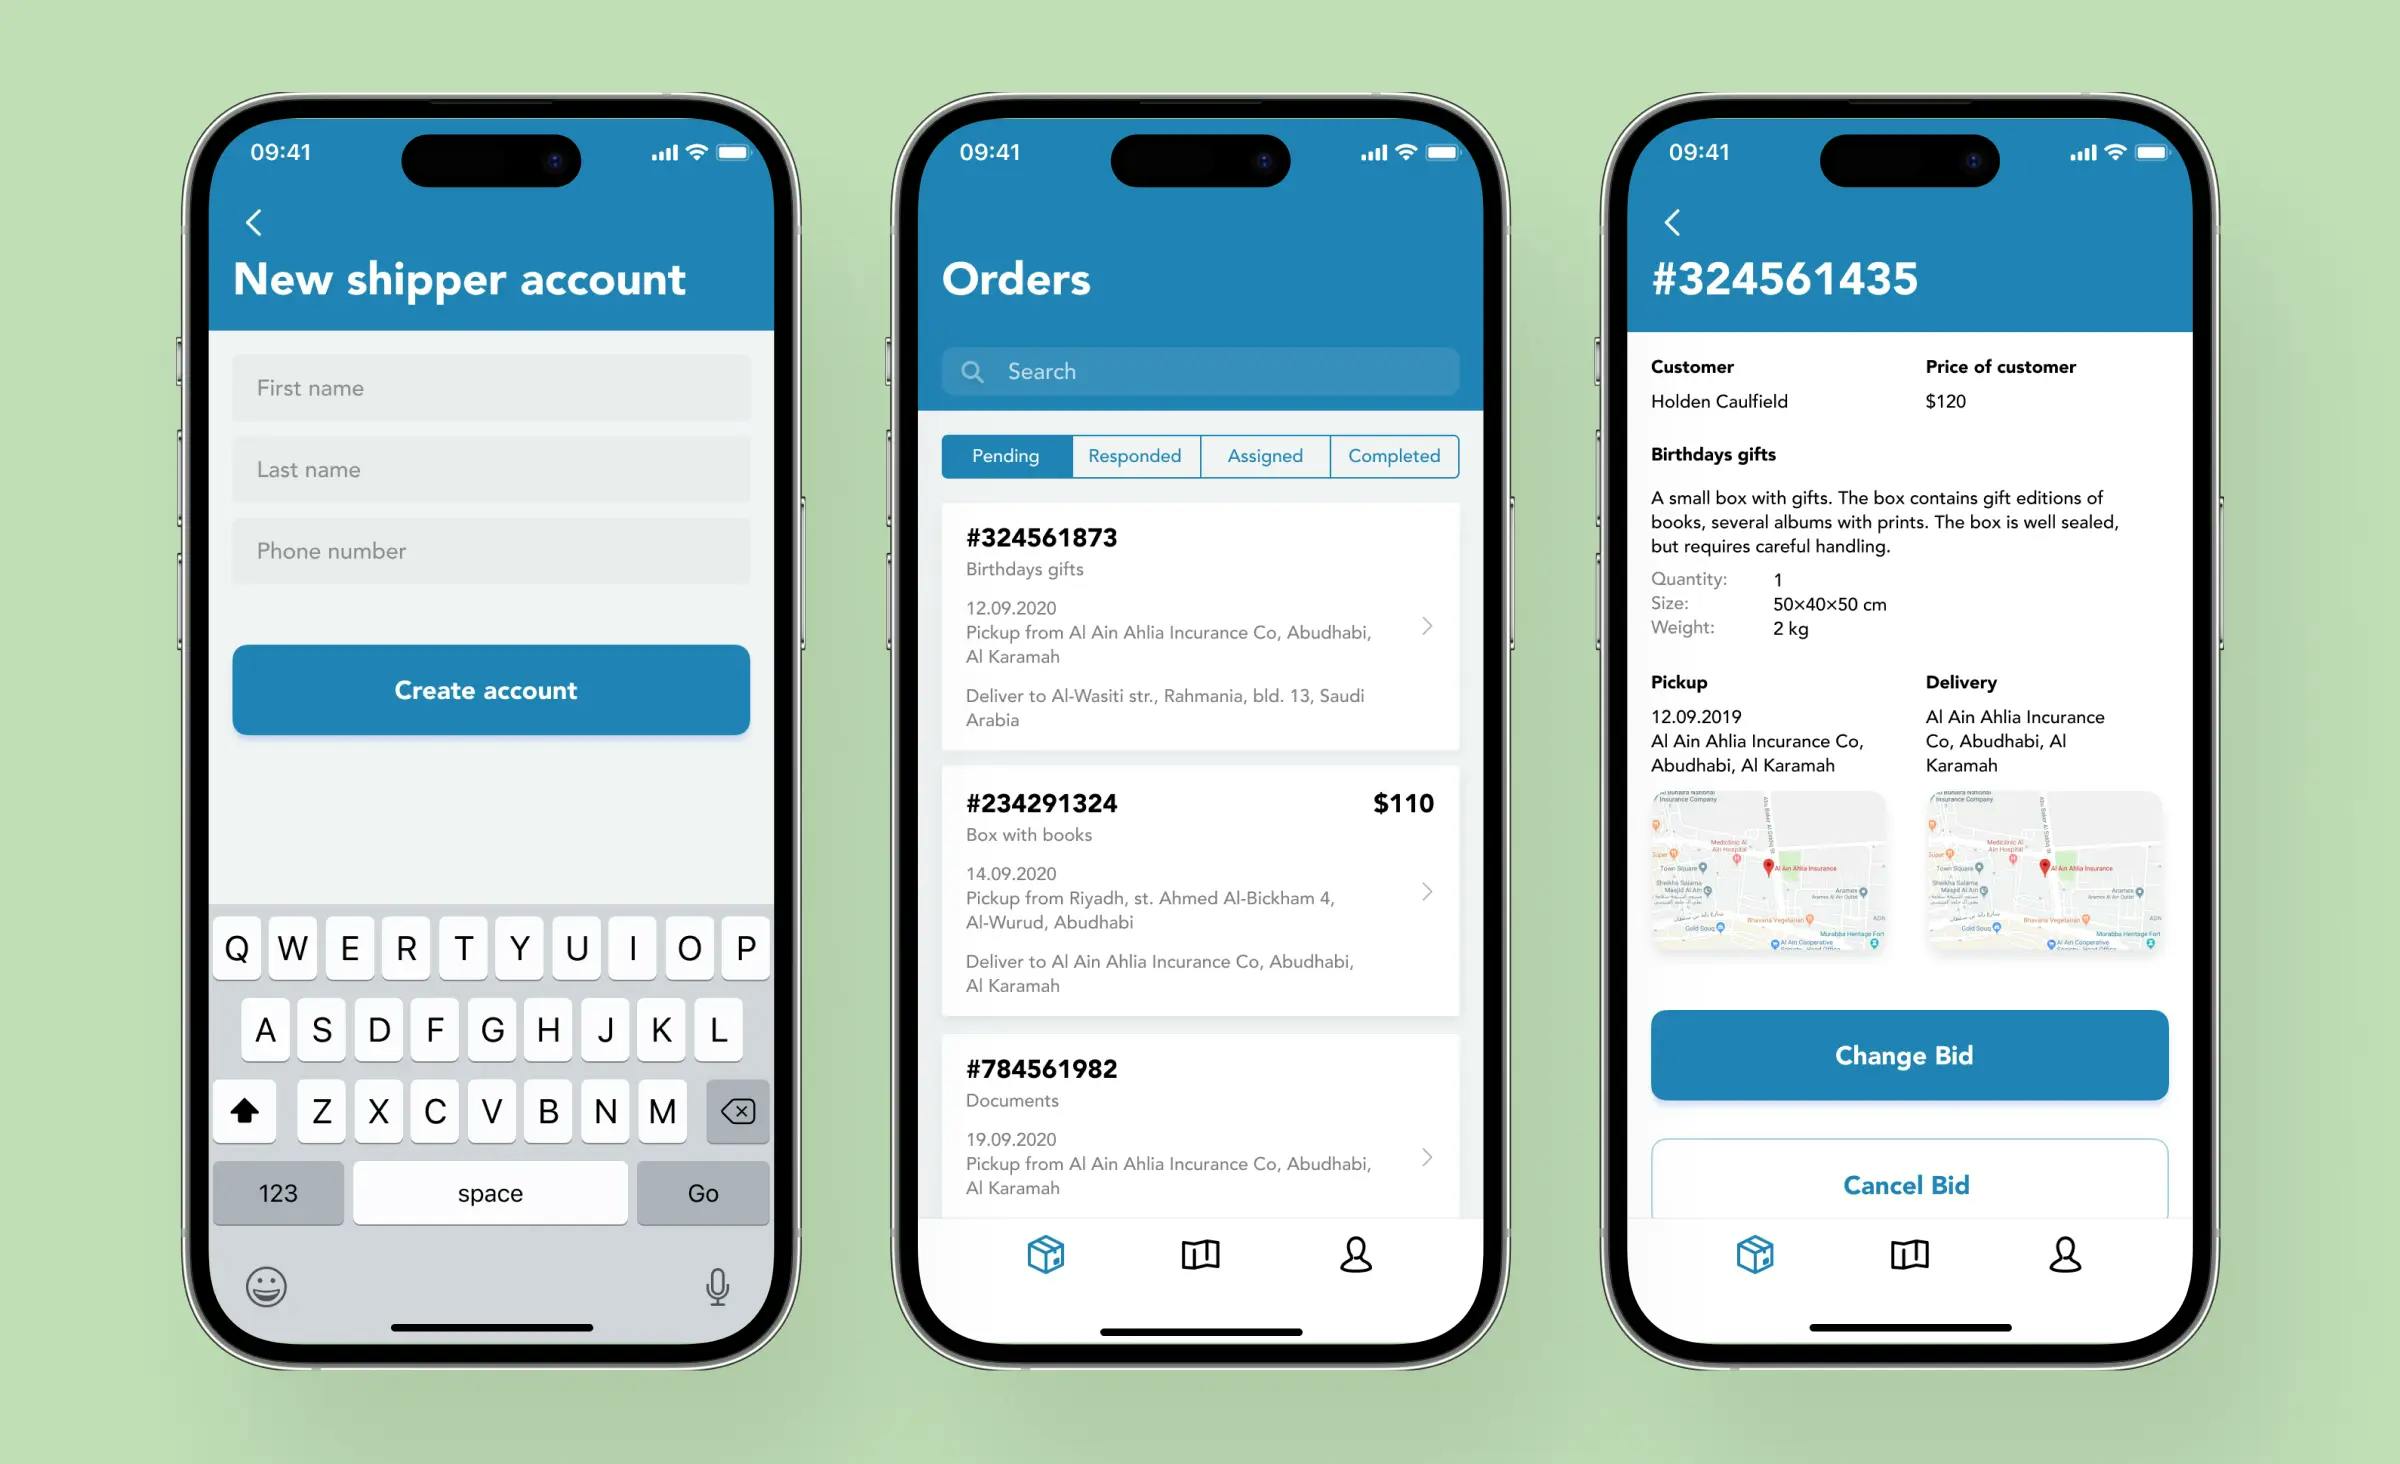 The image shows three ShipMe mobile app screens from the shipper application, including shipper account creation, the order list, and a bid page.